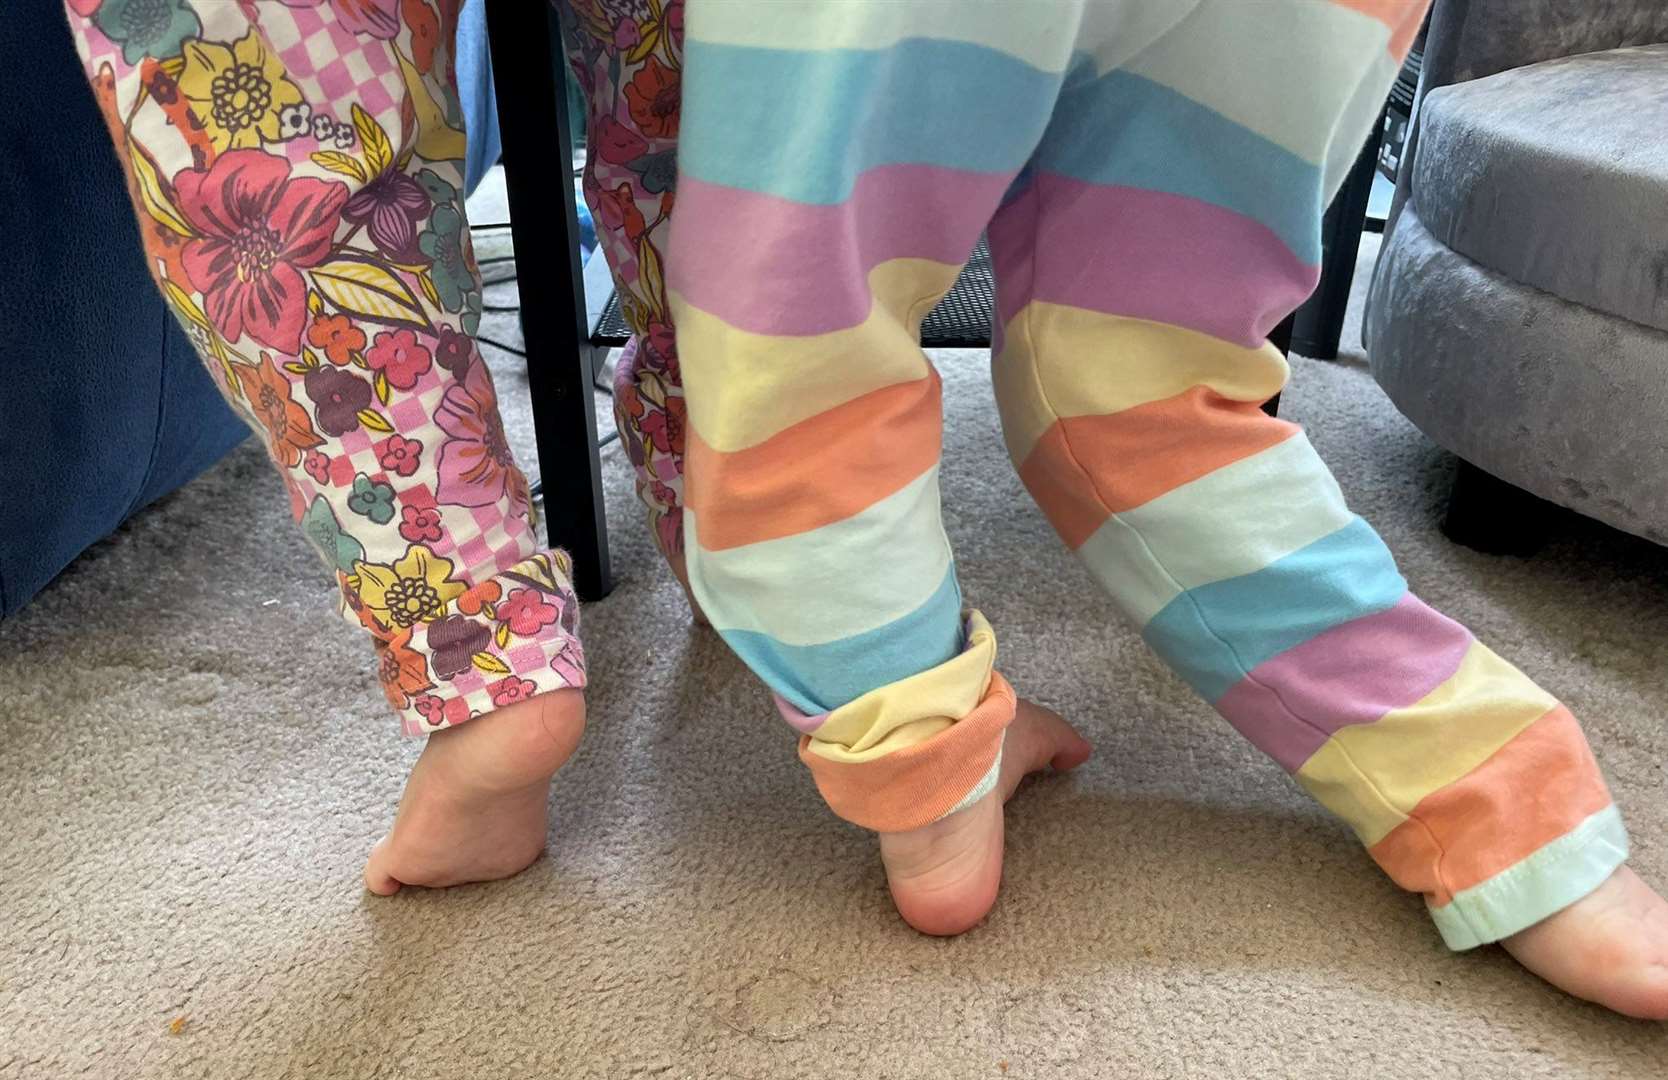 The mum doesn't know if they have underlying health issues that are preventing them from walking. Picture: @PhoenixEdSarah